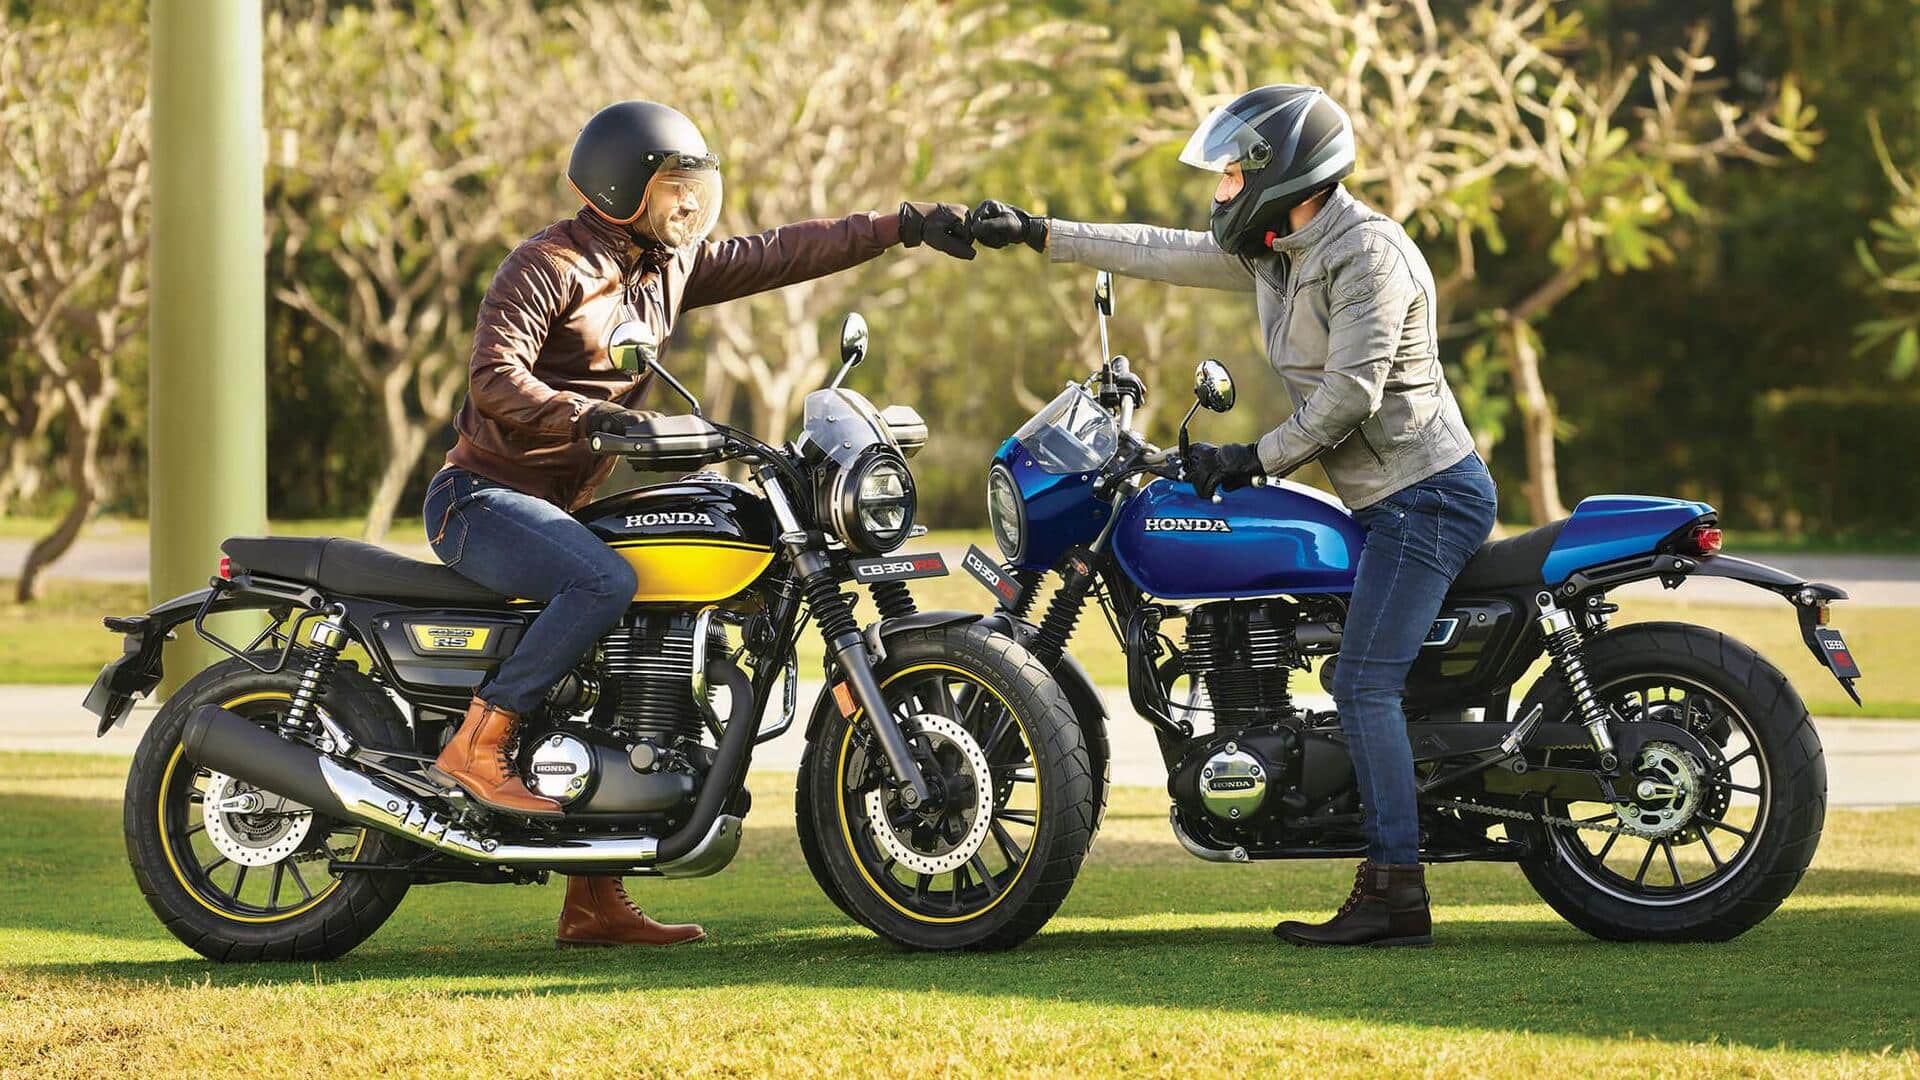 With three Honda CB350 models on offer, what to choose